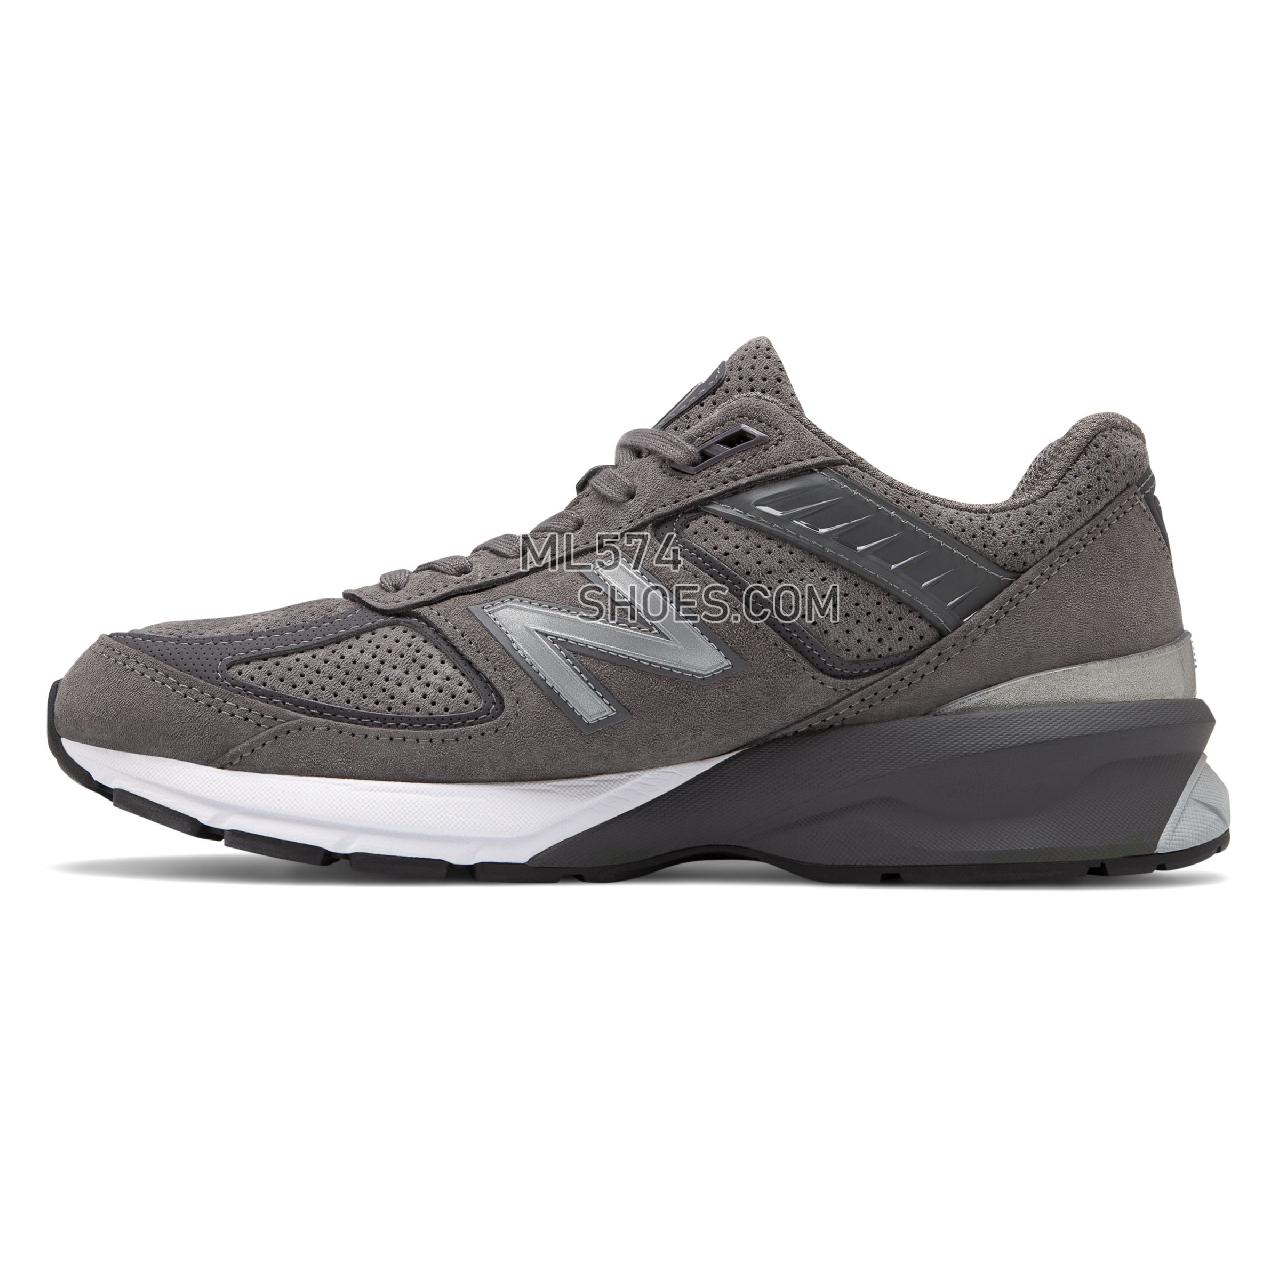 New Balance Made in US 990v5 - Men's Made in US 990v5 - Castlerock with Magnet and White - M990SG5